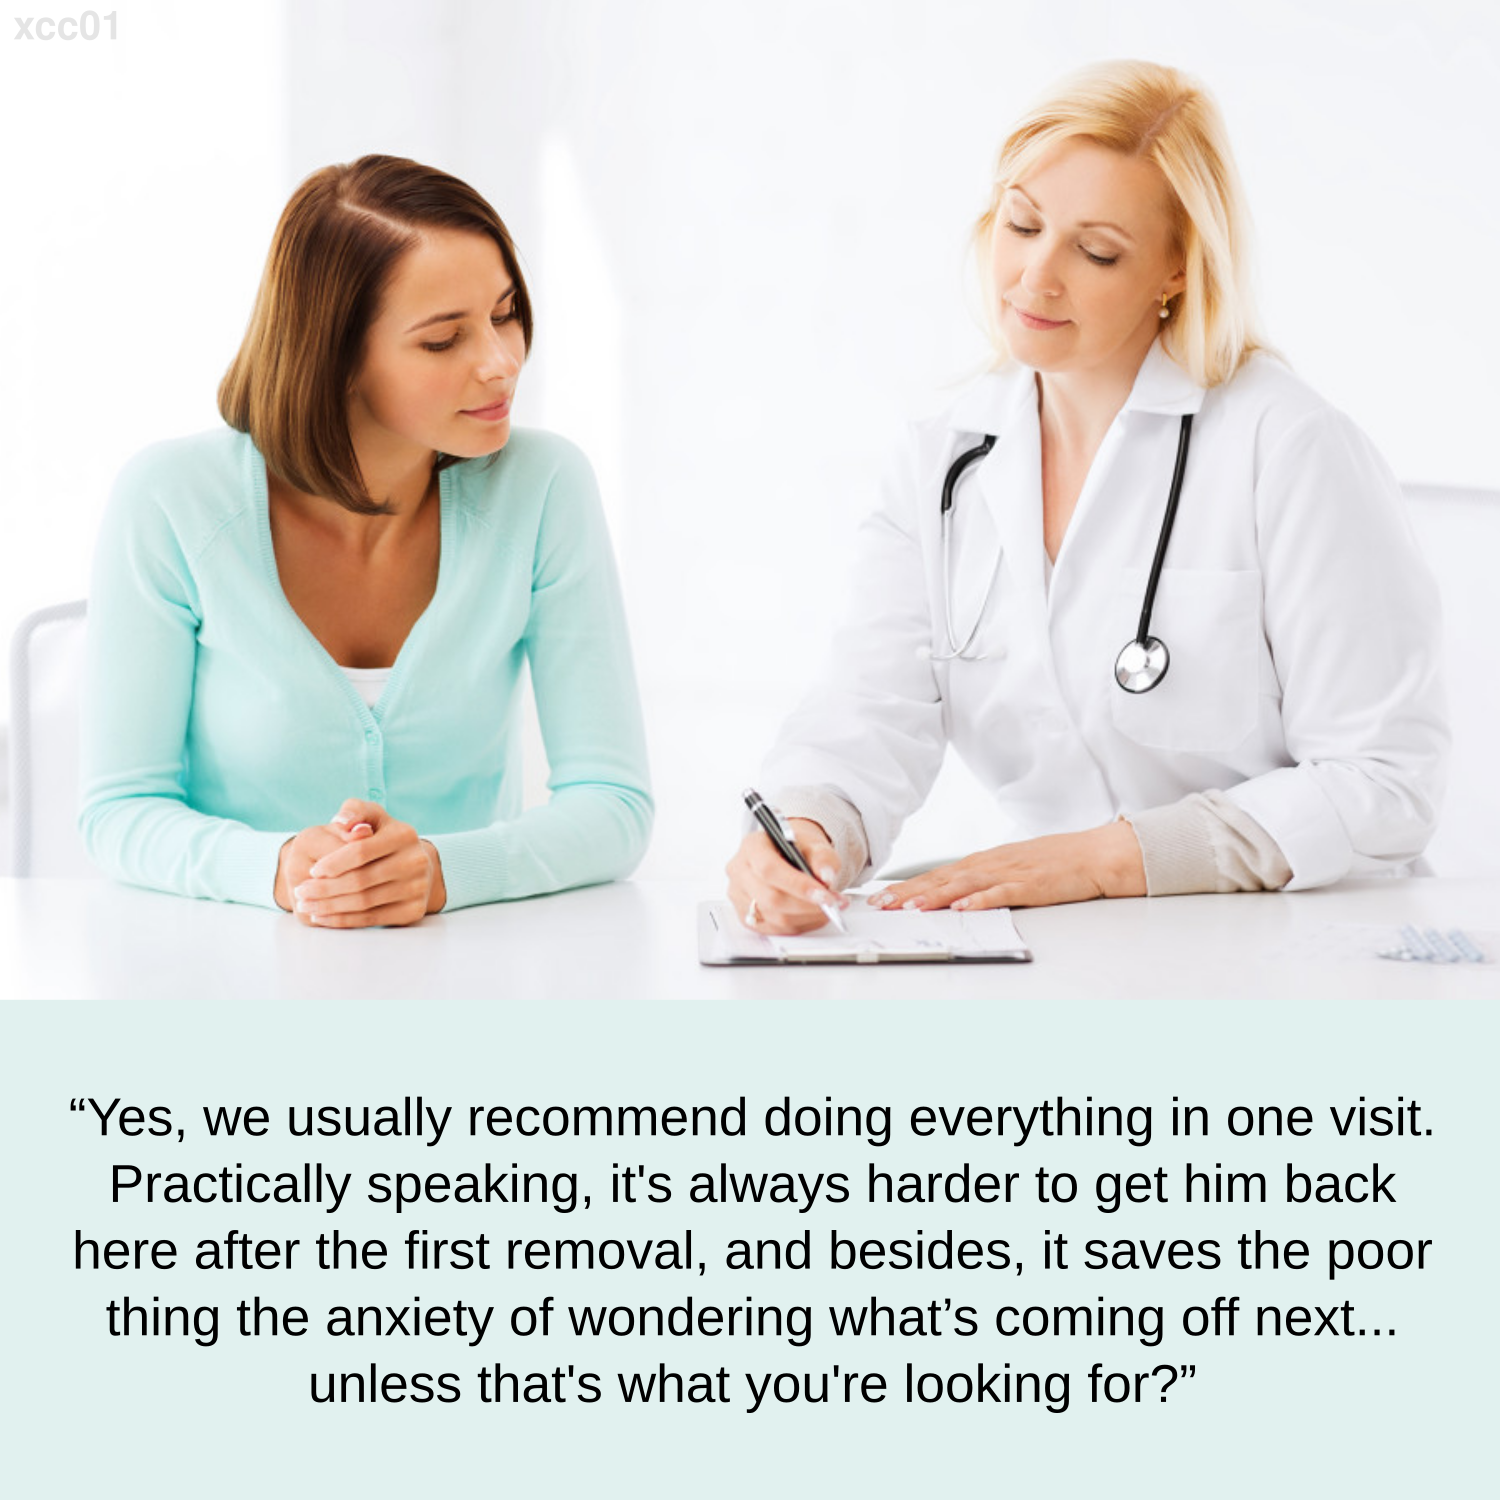 Yes, we usually recommend doing everything in one visit. Practically speaking, it's always harder to get him back here after the first removal, and besides, it saves the poor thing the anxiety of wondering what's coming off next... unless that's what you're looking for?
